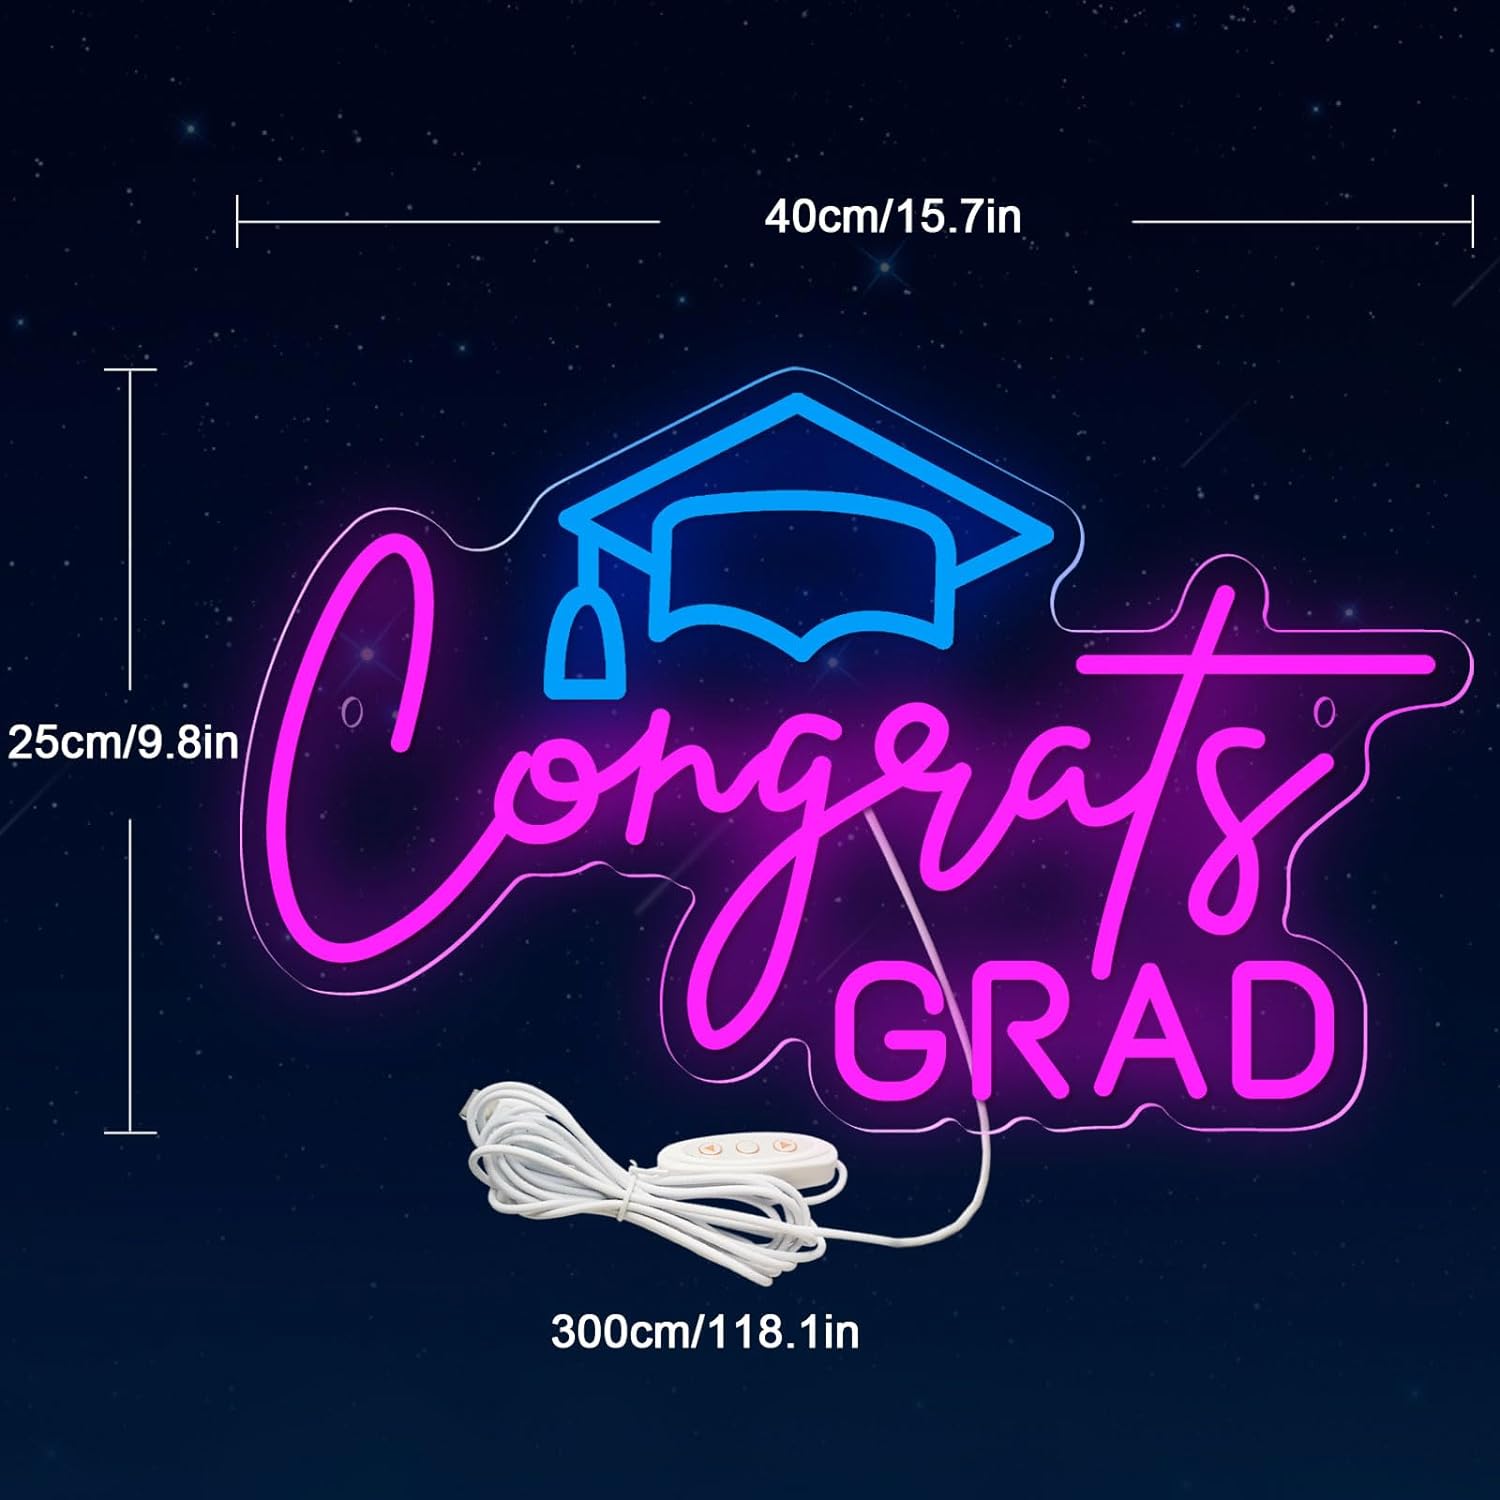 Congrats GRAD Neon Signs Dimmable LED Light Sign for Wall Decor